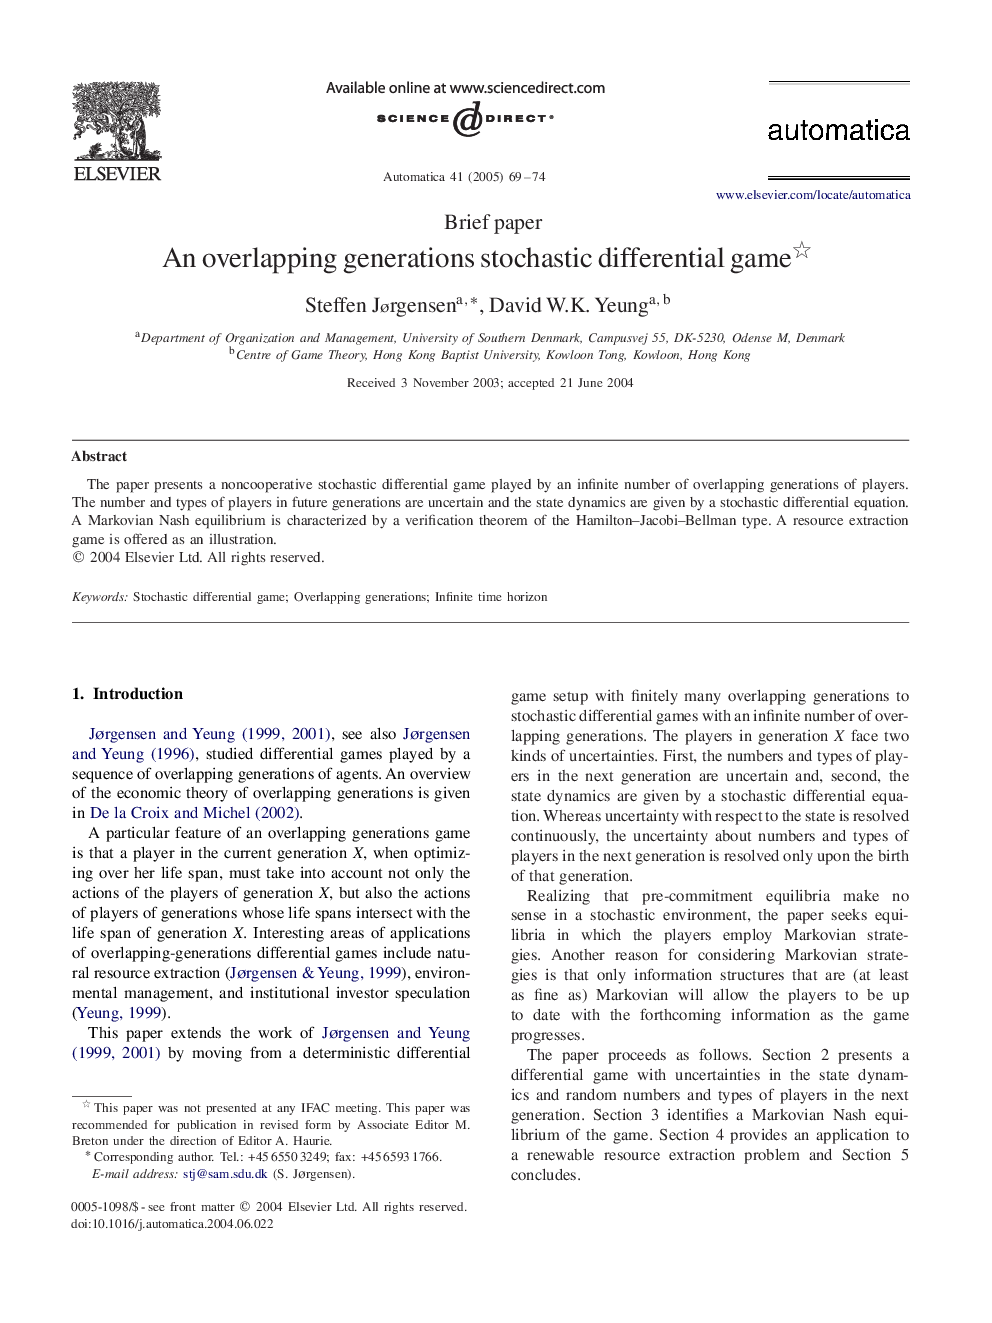 An overlapping generations stochastic differential game